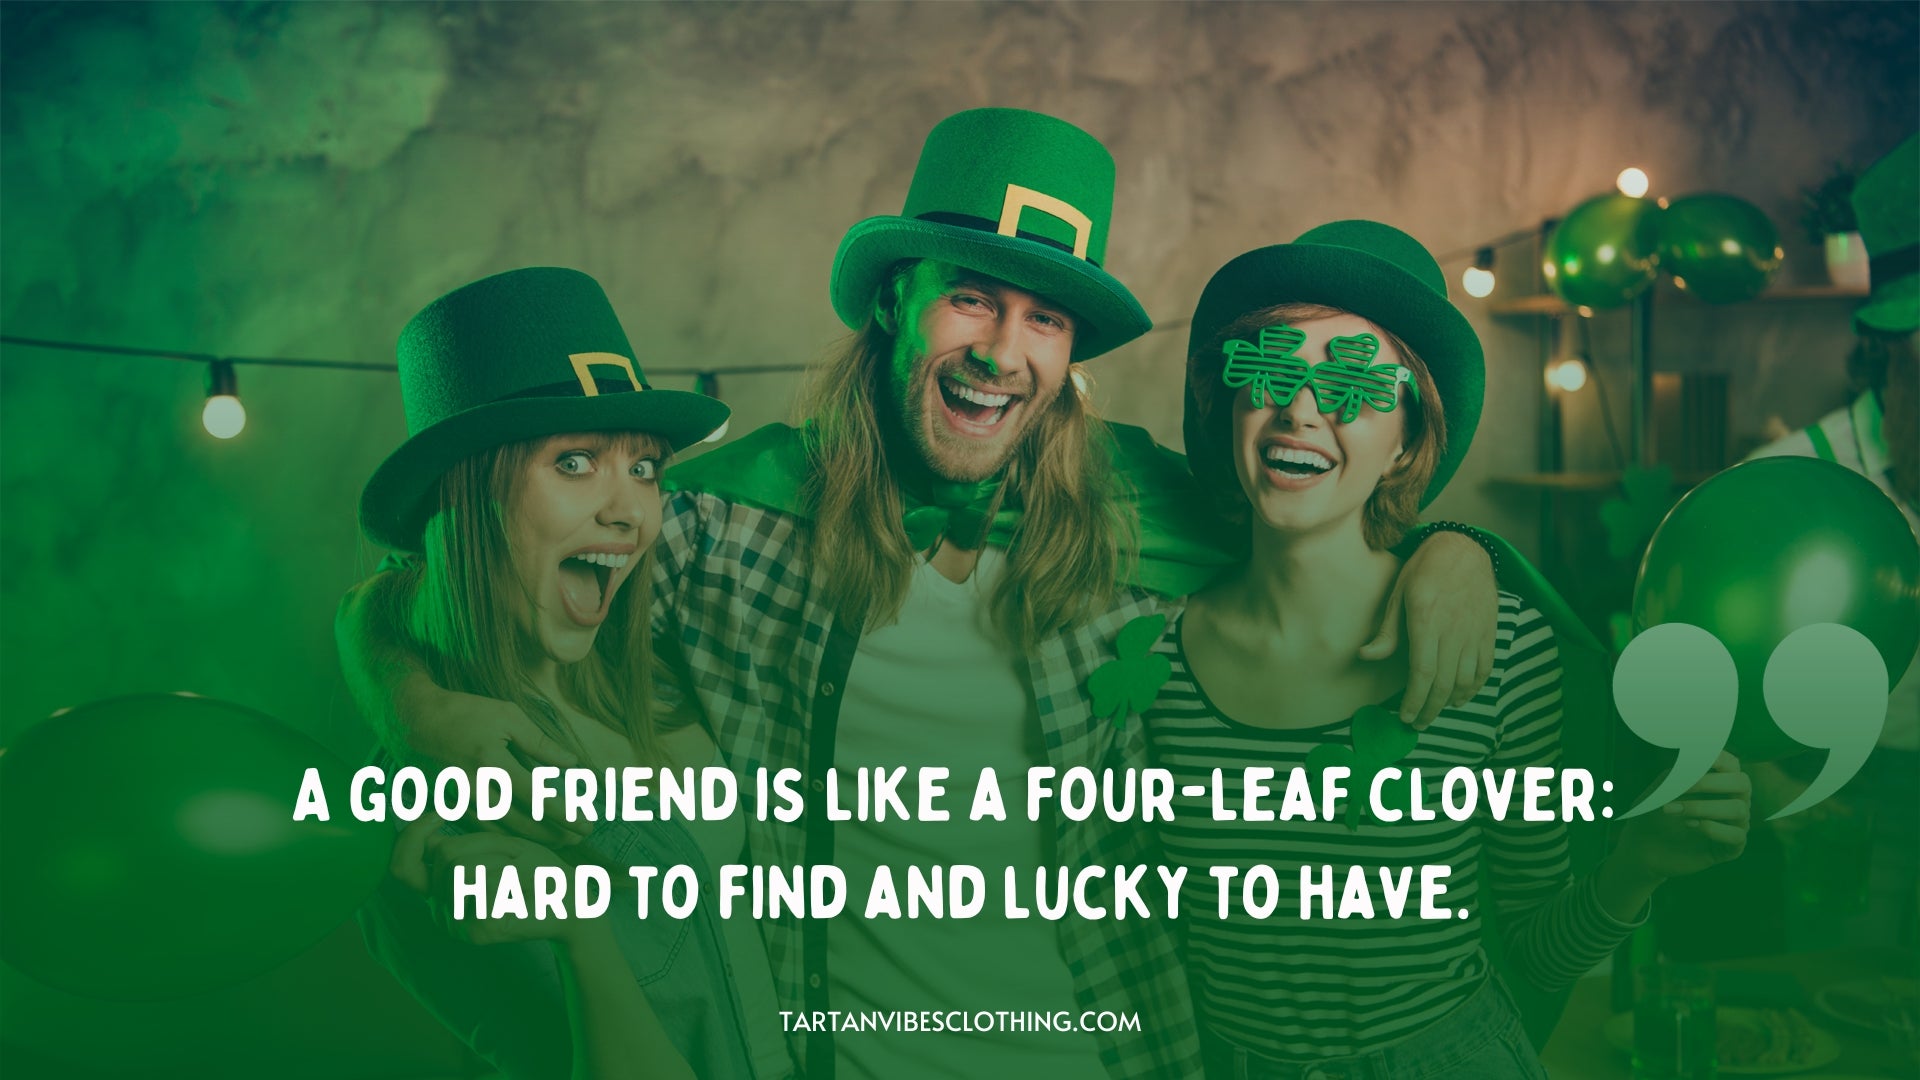 Family-Friendly Sayings in Patrick's Day